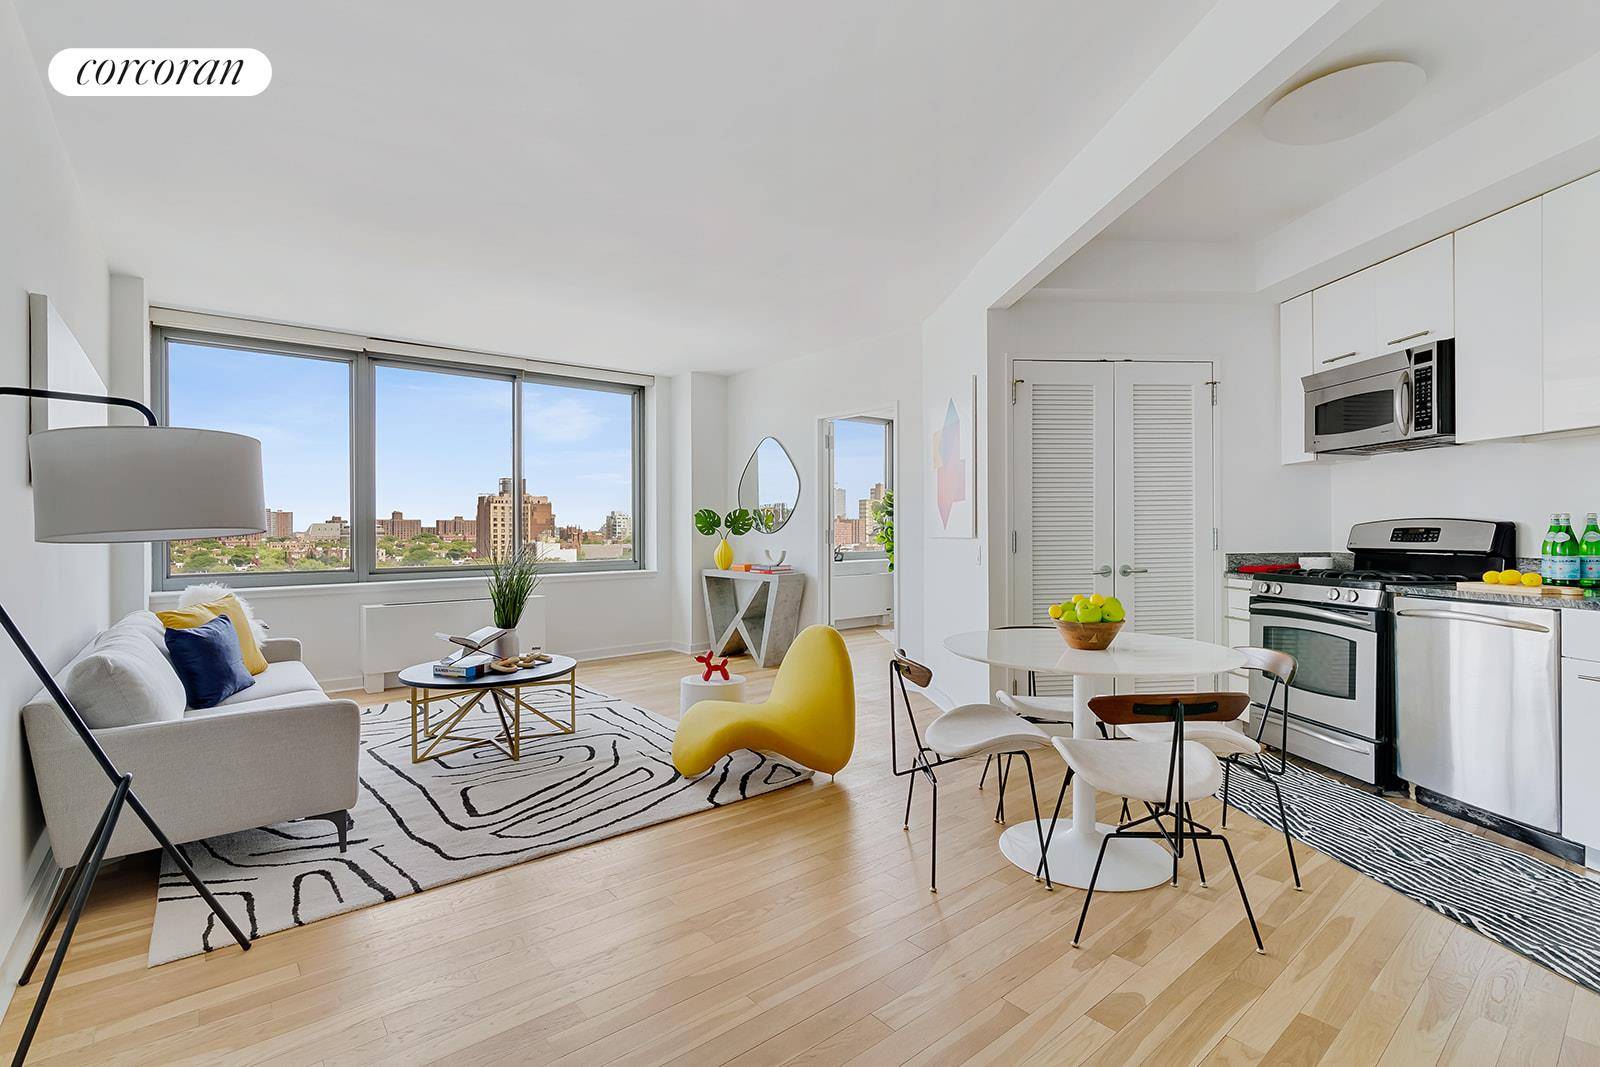 Introducing 230 Ashland Place where elegance and functionality conjoin in this full service, luxury building nestled at the edge of the historic brownstone district of Fort Greene.